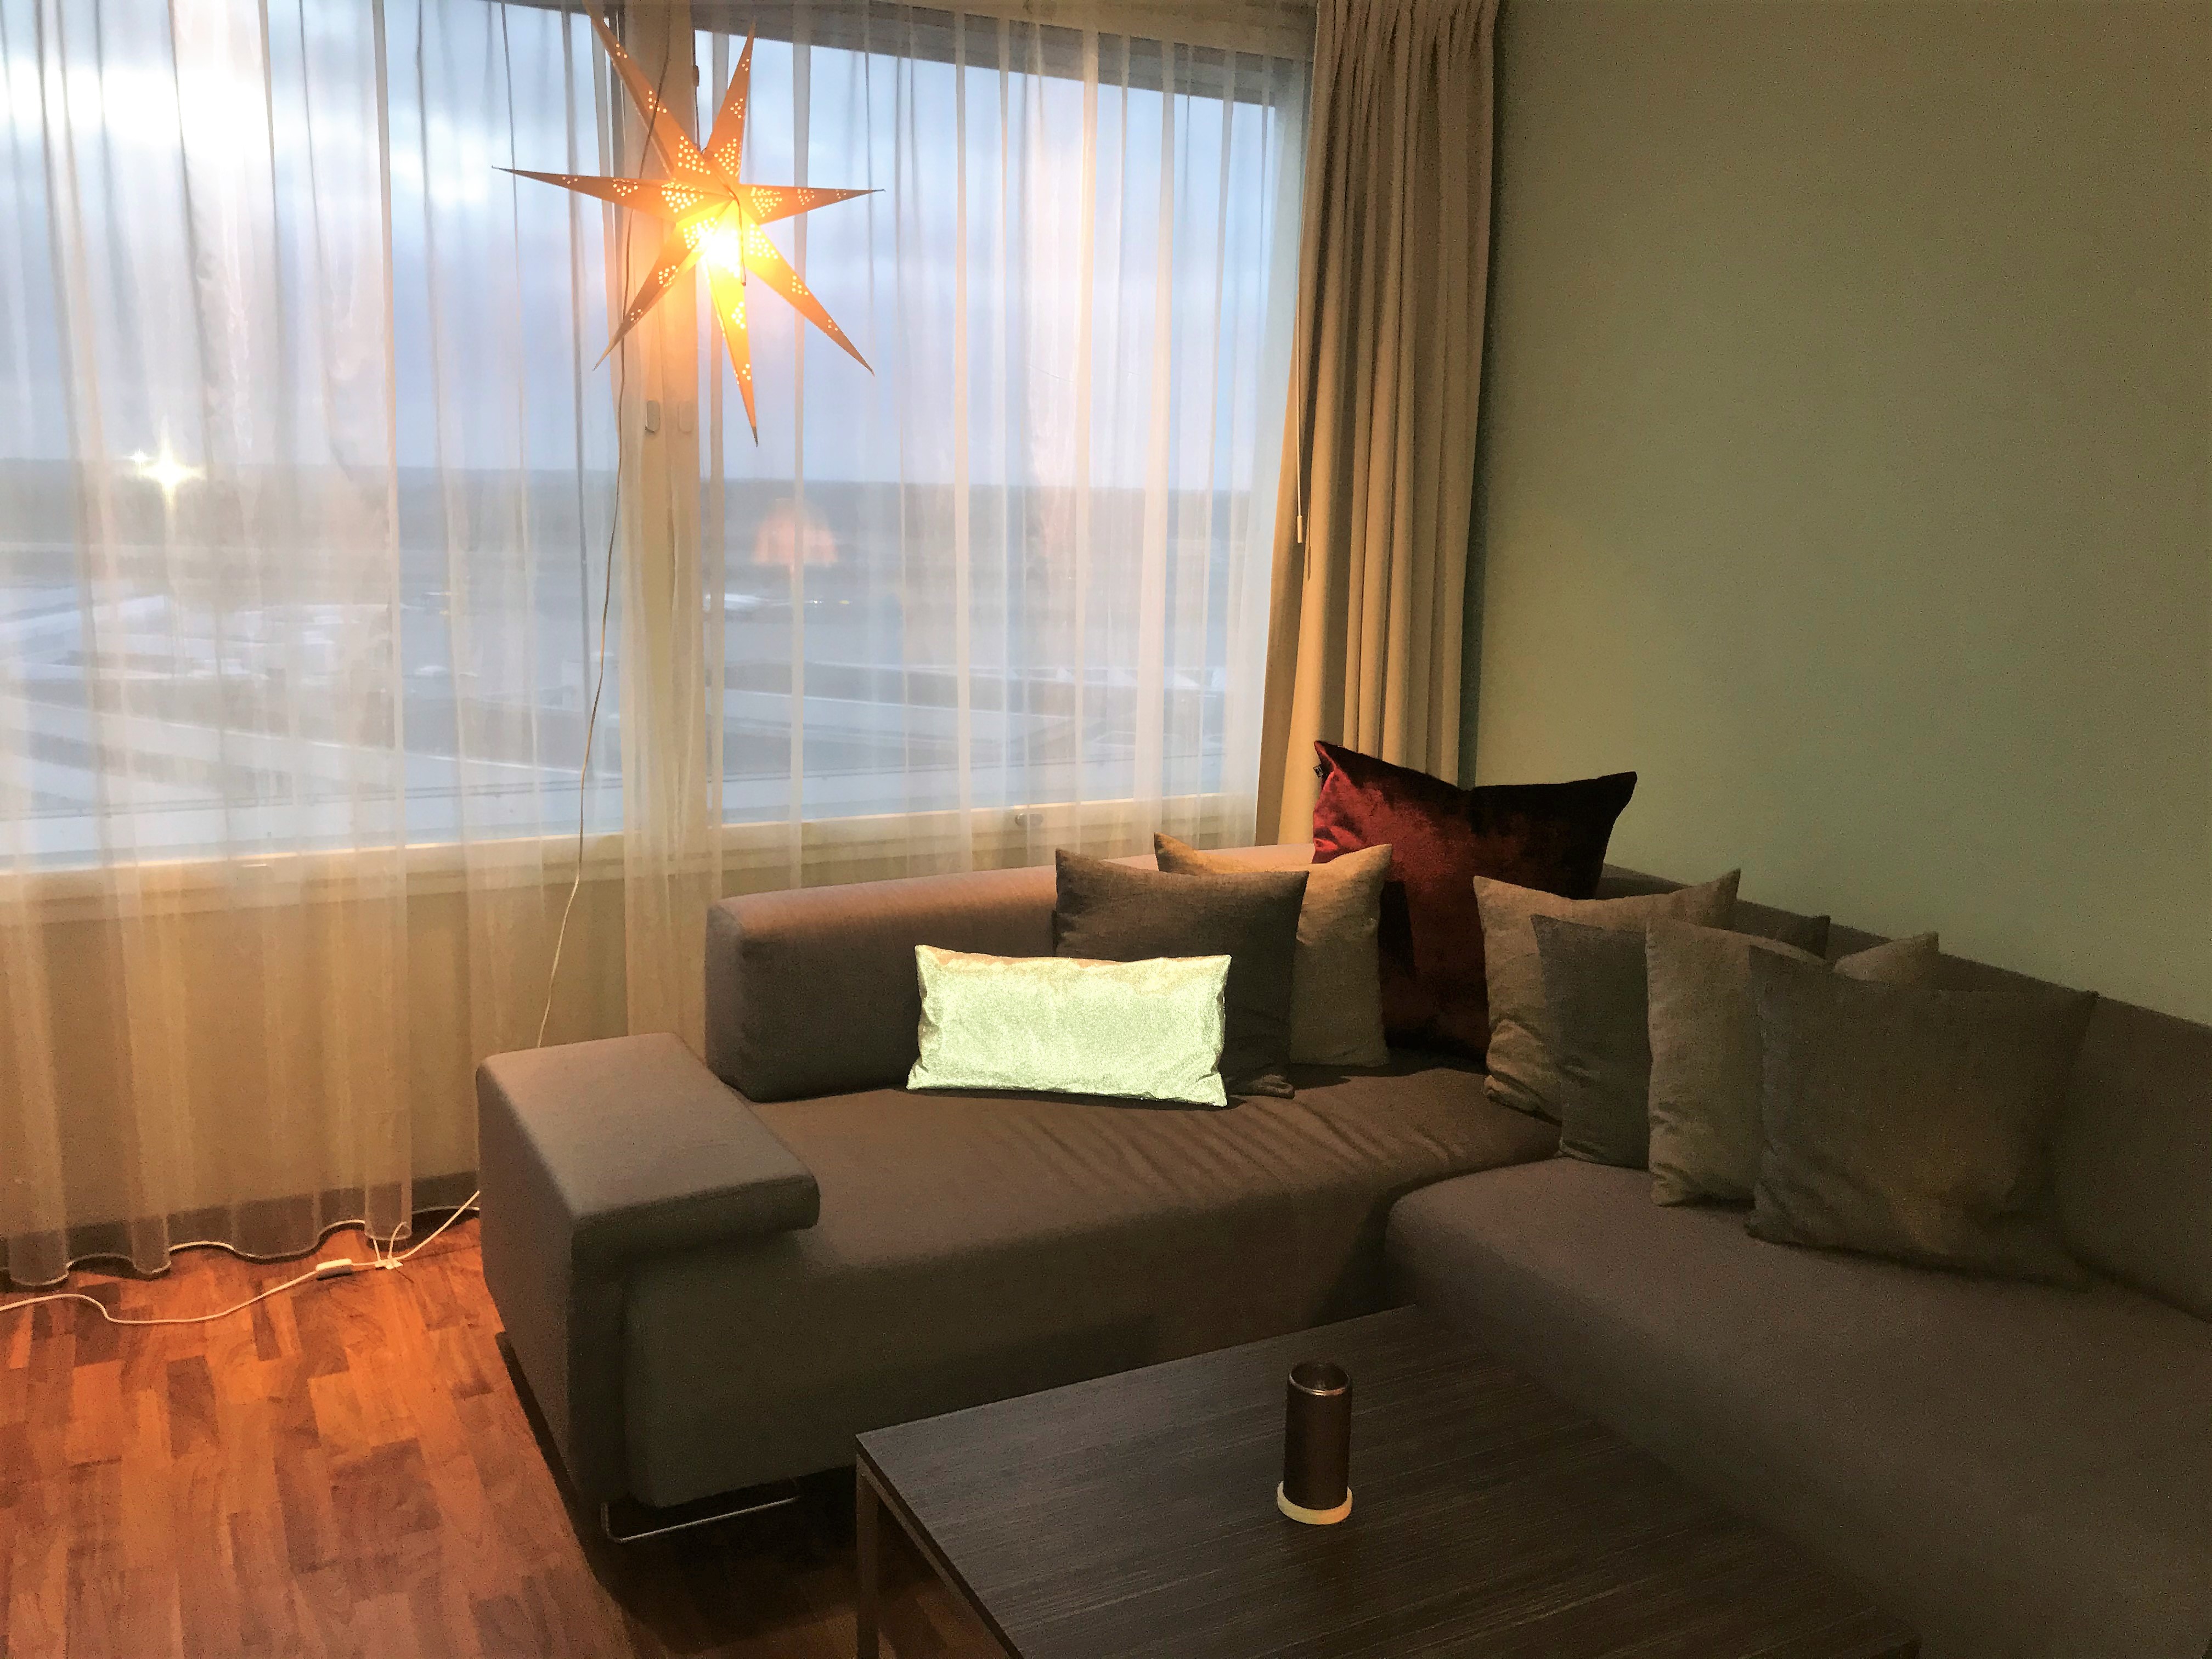 a couch and coffee table in a room with a star shaped light